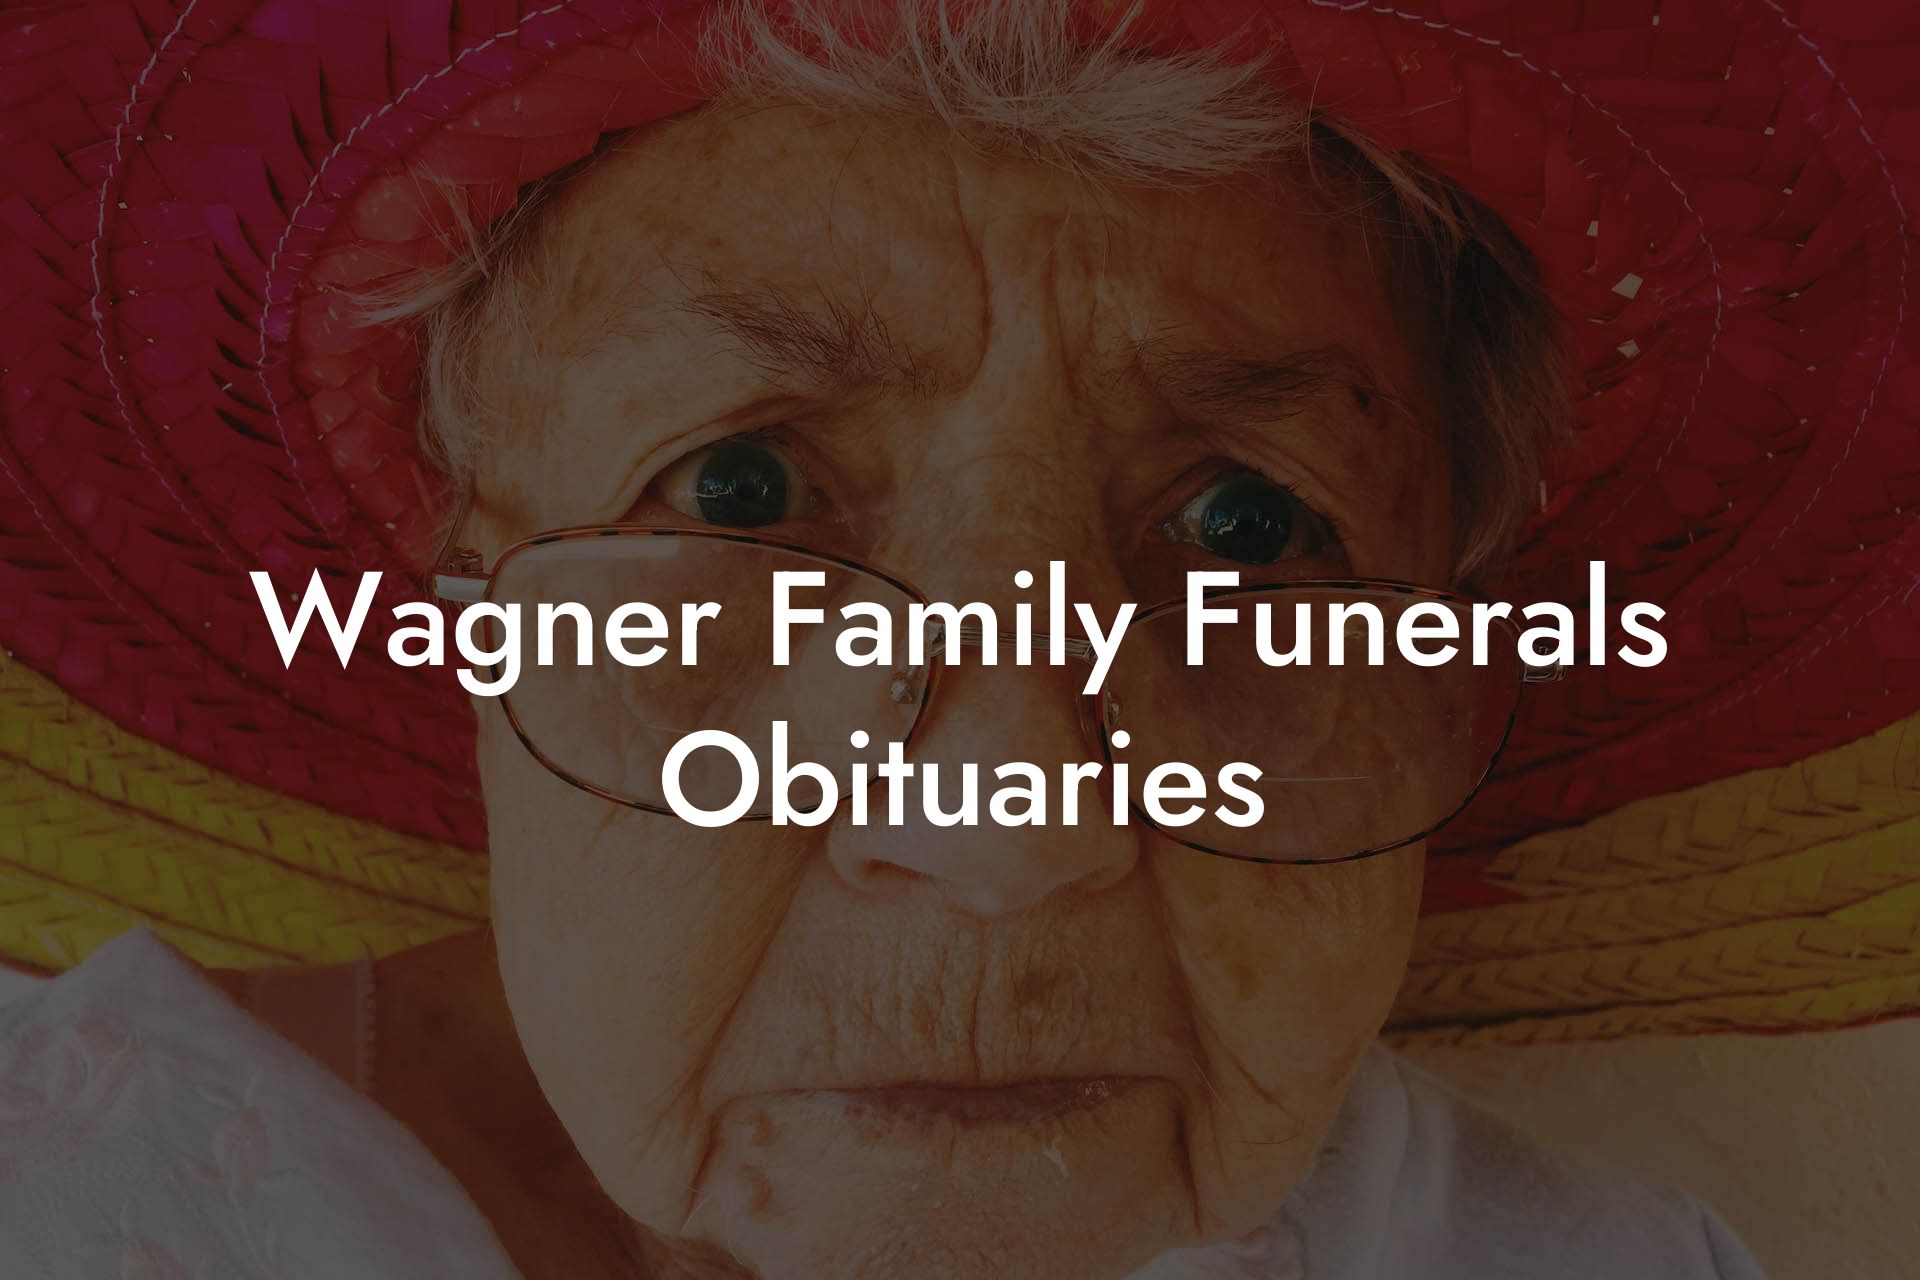 Wagner Family Funerals Obituaries